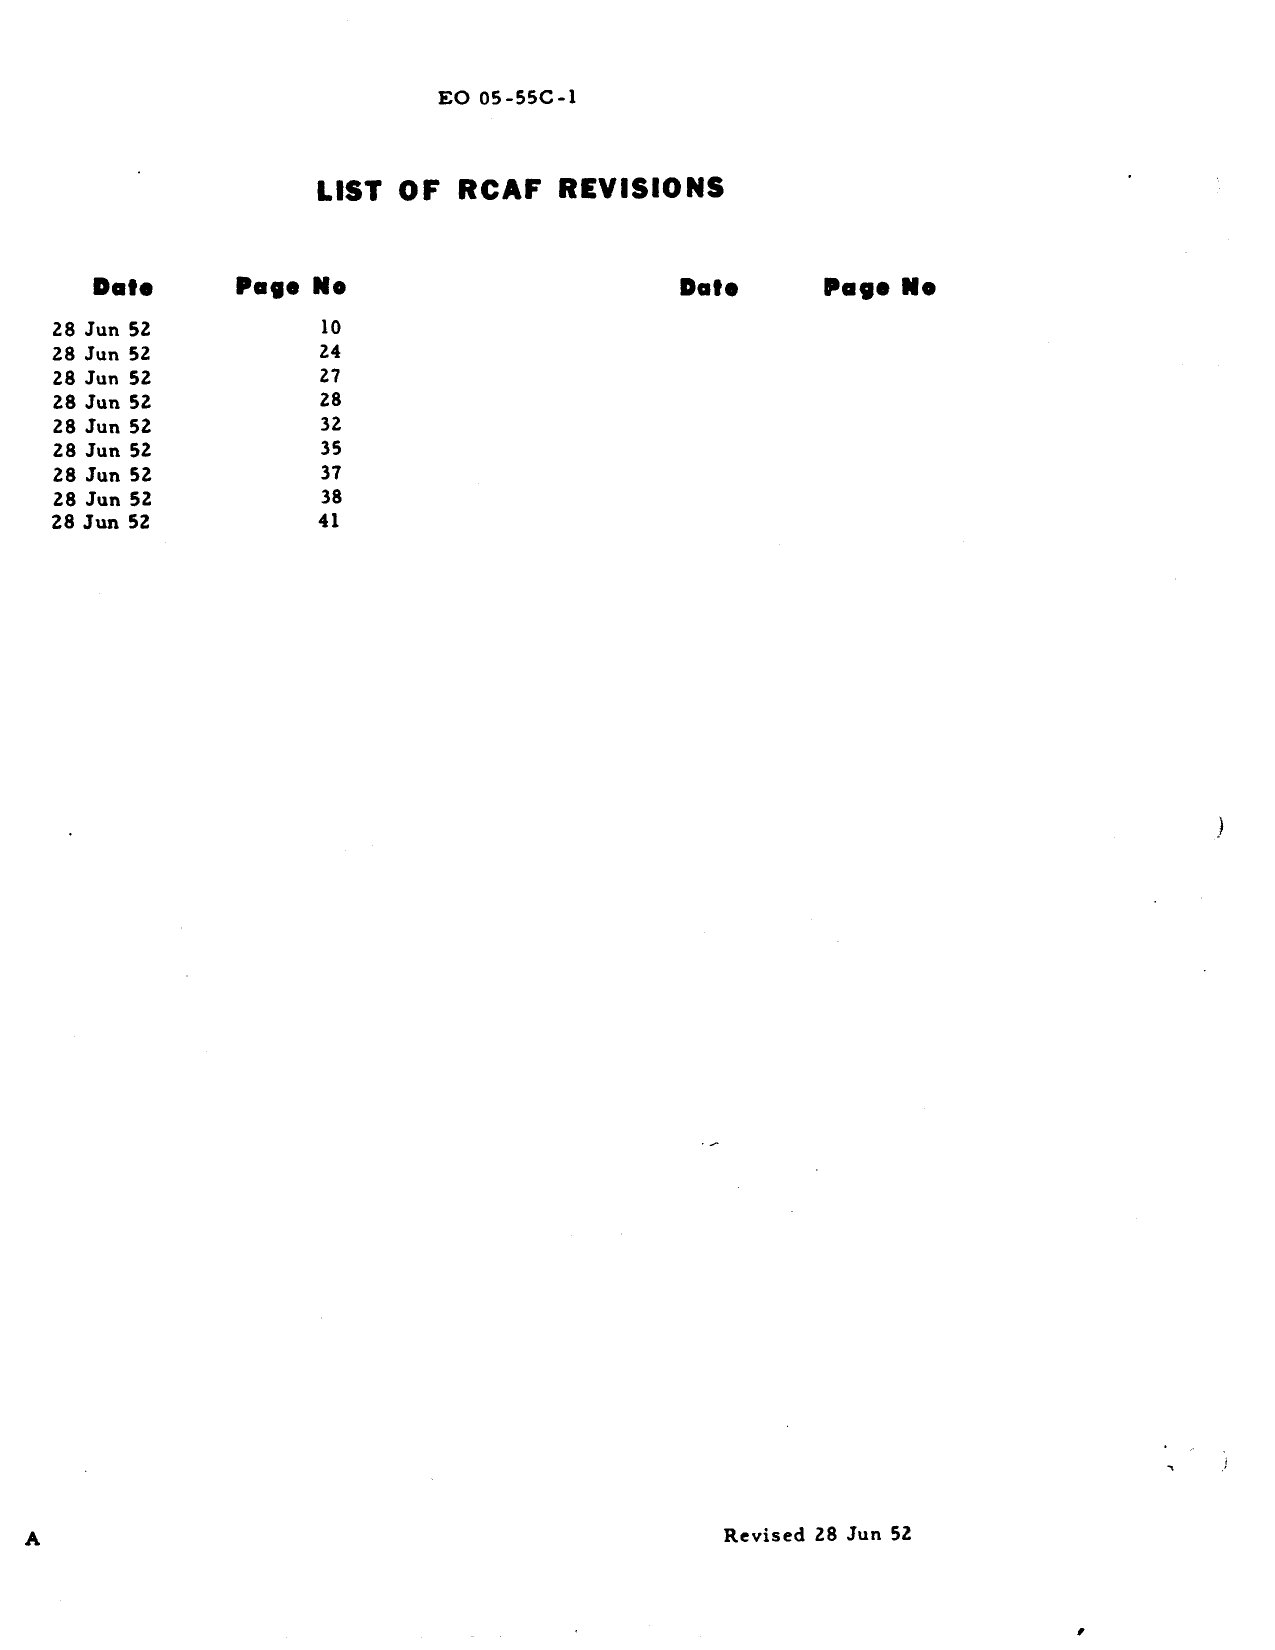 Sample page 6 from AirCorps Library document: Pilot's Operating Instructions for Mustang 4 (Royal Canadian Air Force)